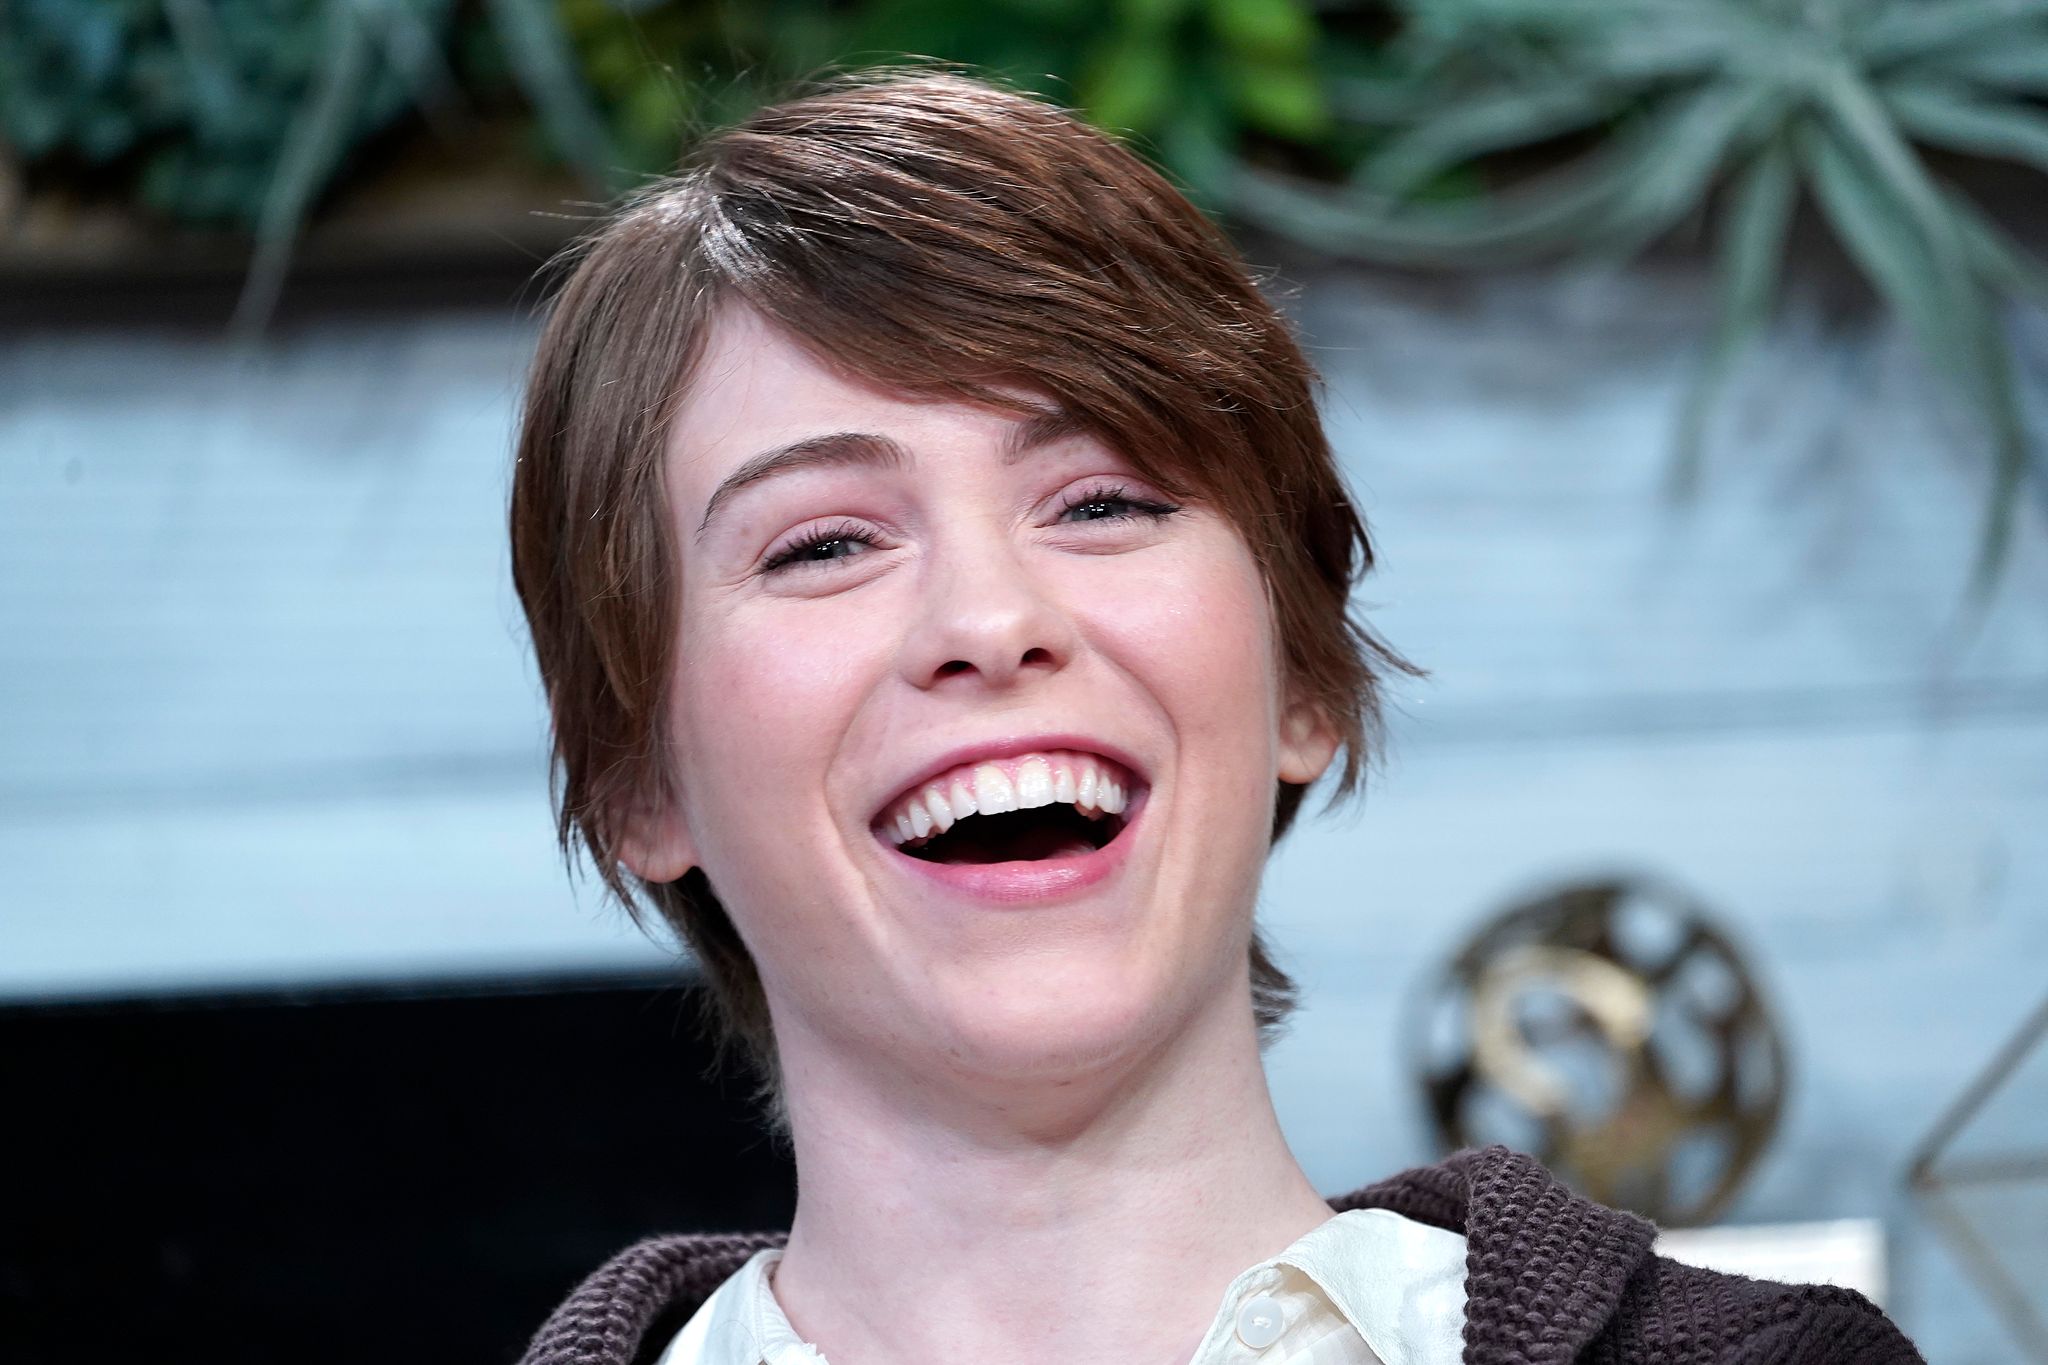 Sophia Lillis during BuzzFeed's "AM To DM" on February 27, 2020, in New York City. | Source: Getty Images